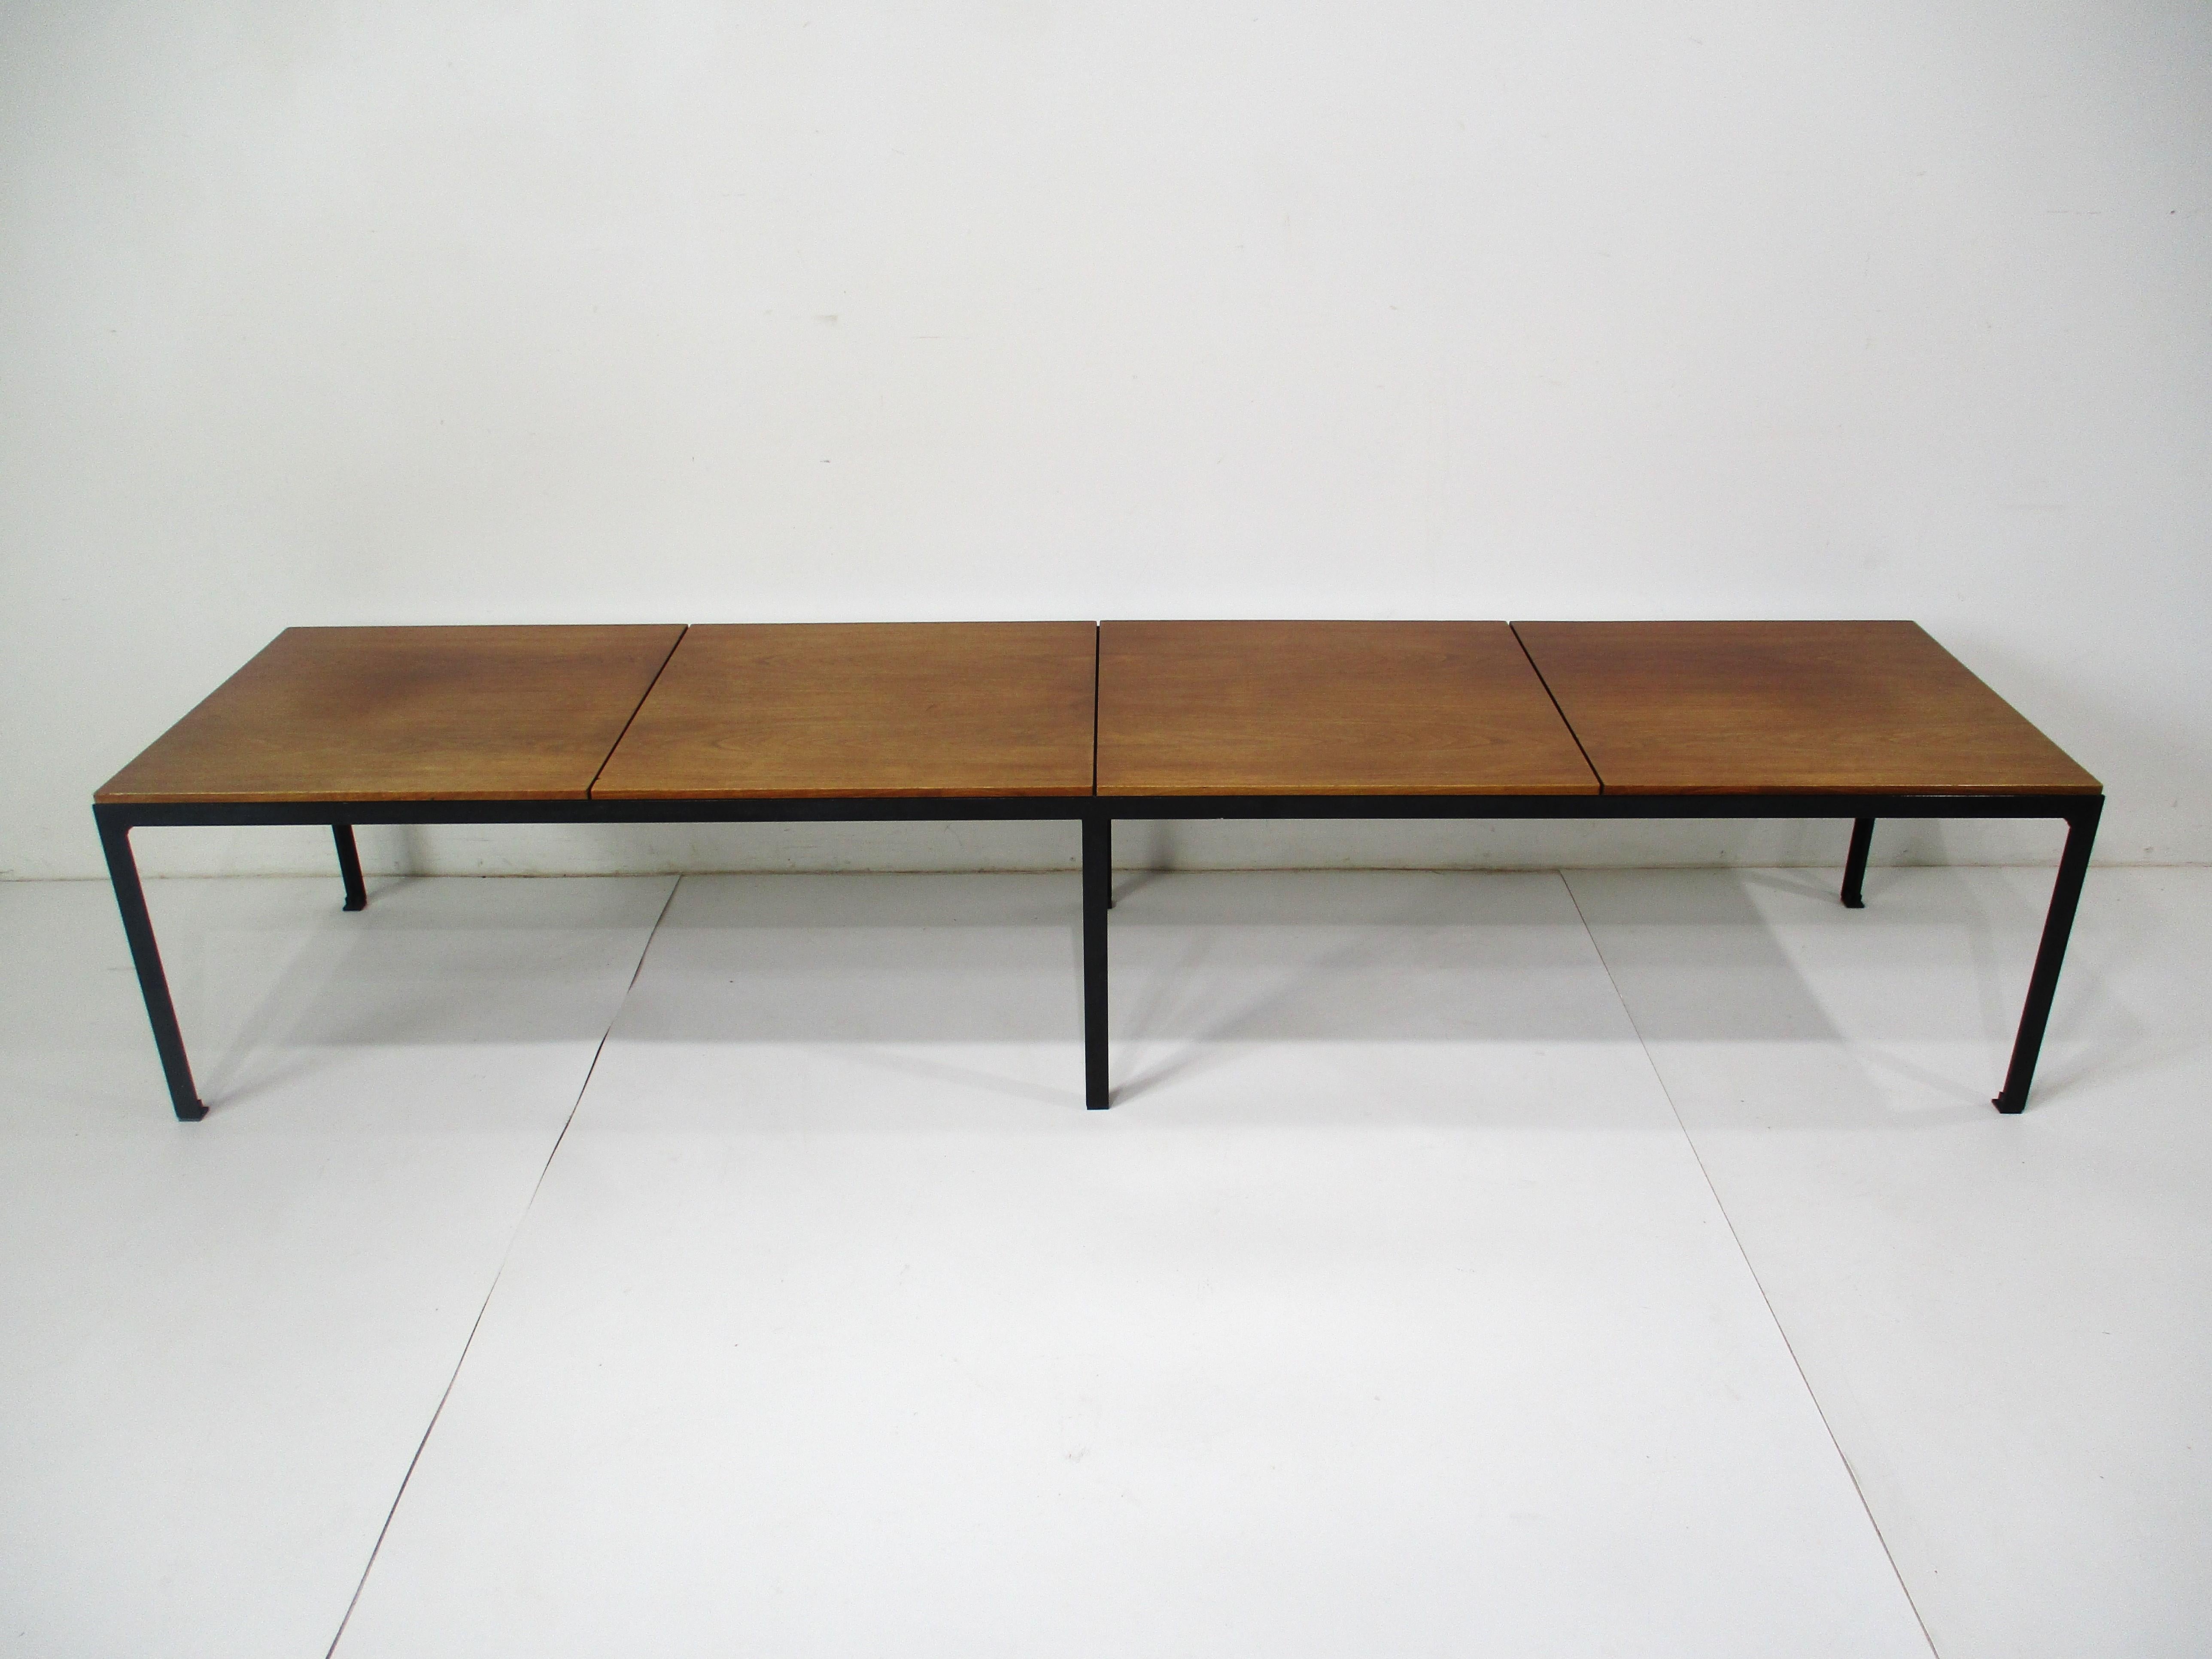 A very early and rare segmented topped walnut coffee table or bench with satin black T angled metal base . This architectural styled piece would fit into almost any interior room or entrance way with it's well crafted and simple clean lines . Has